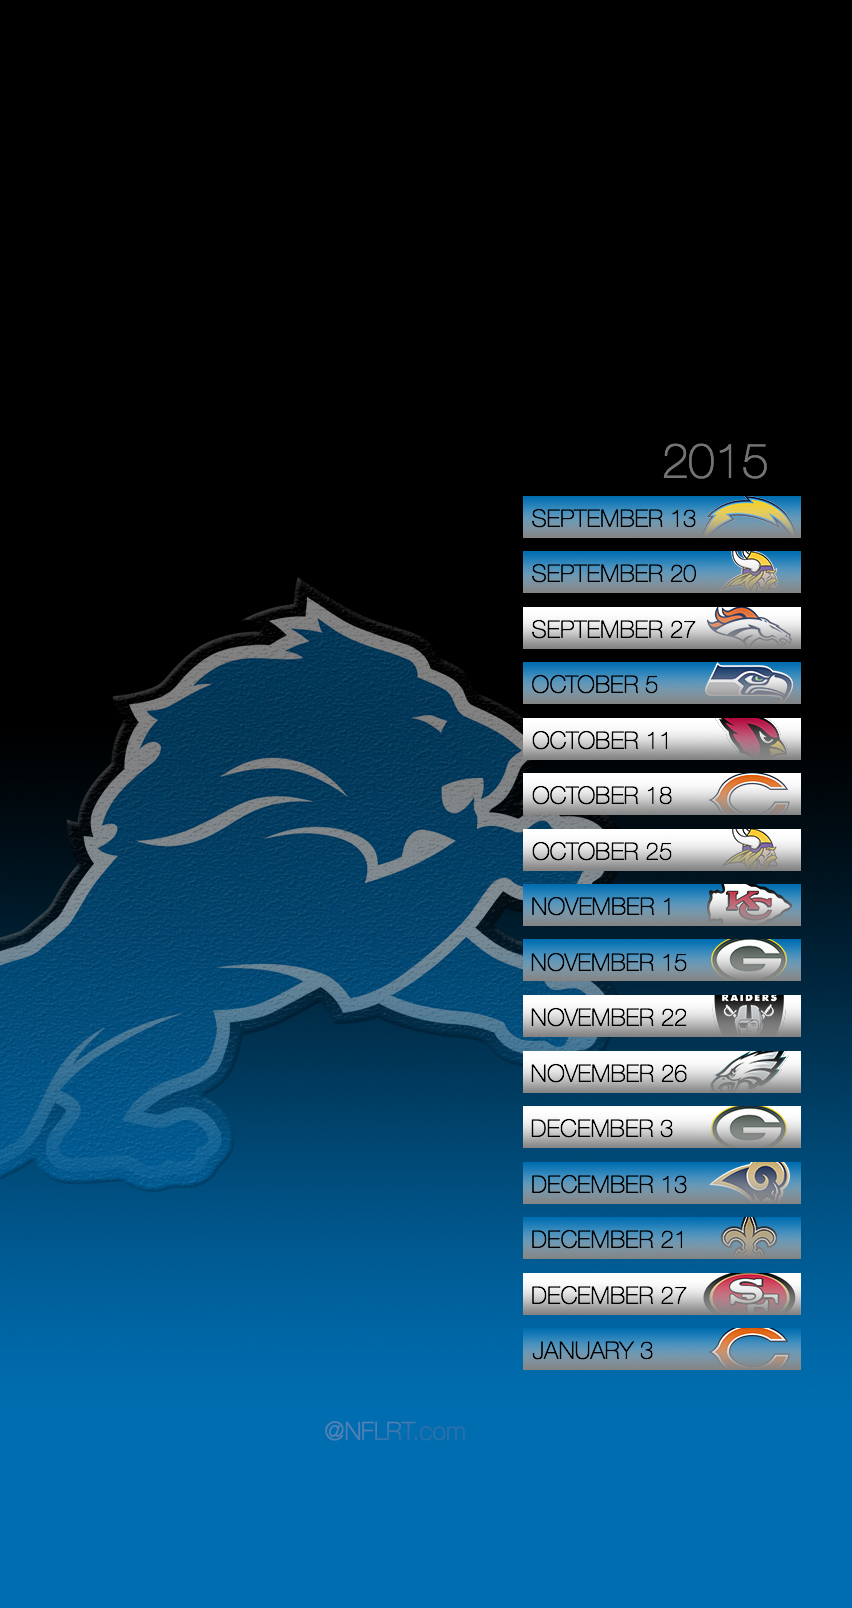  NFL Schedule Wallpapers Page of NFLRT